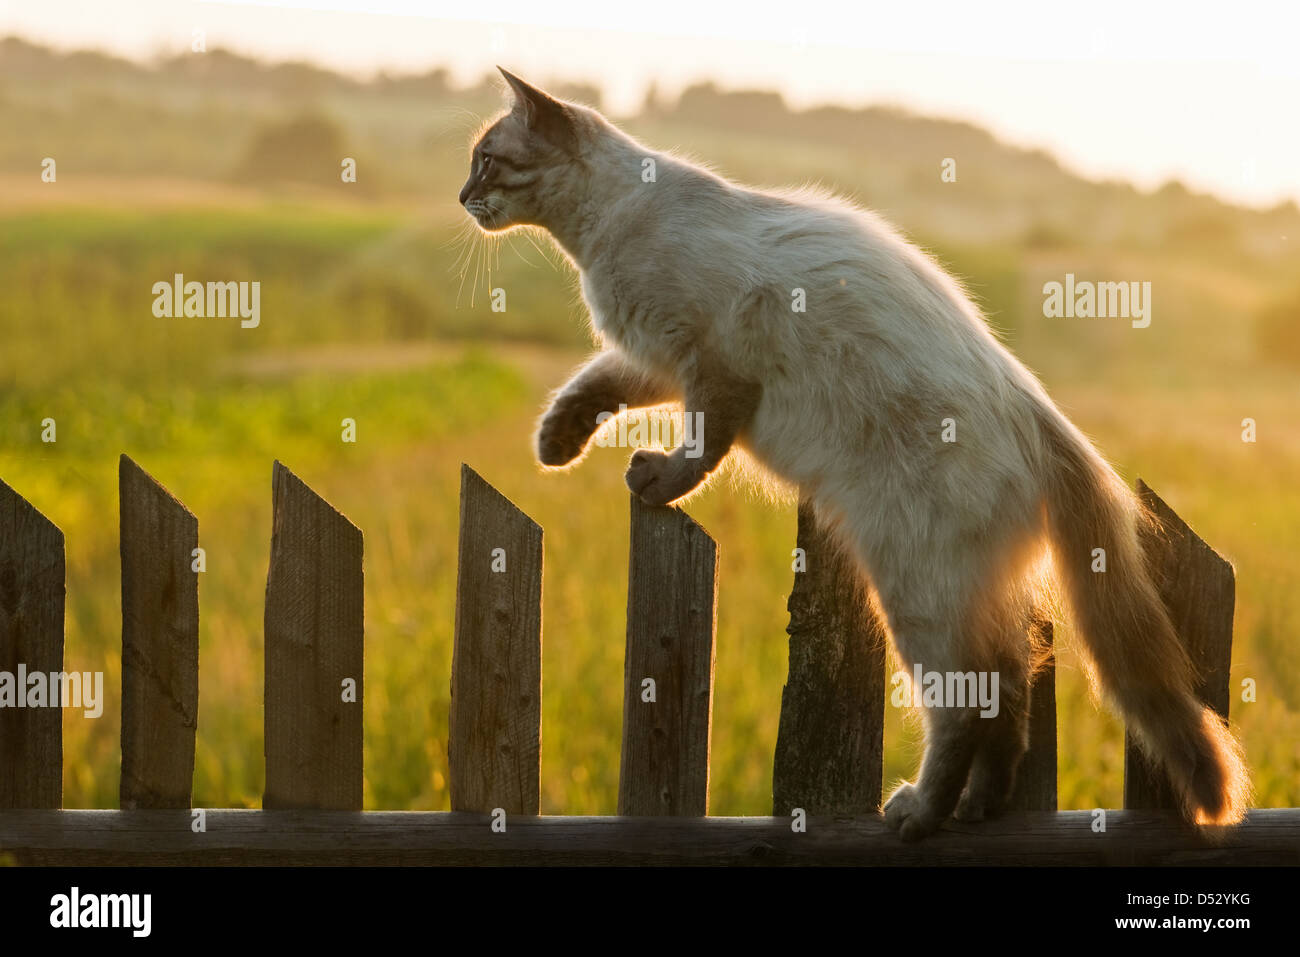 cat on fence close up Stock Photo